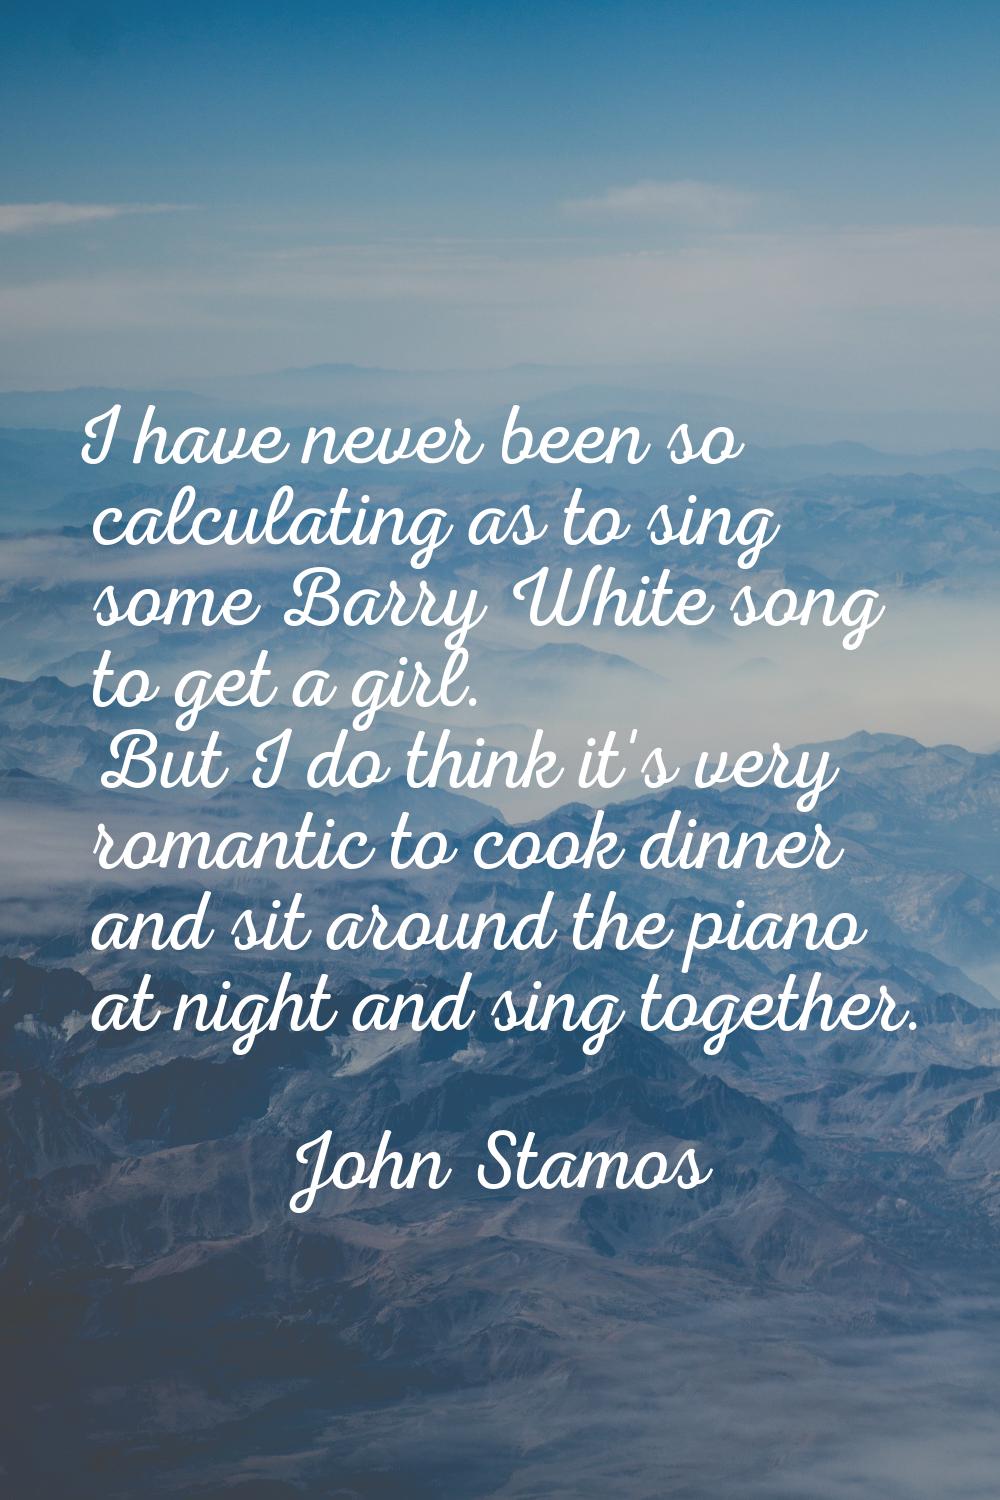 I have never been so calculating as to sing some Barry White song to get a girl. But I do think it'